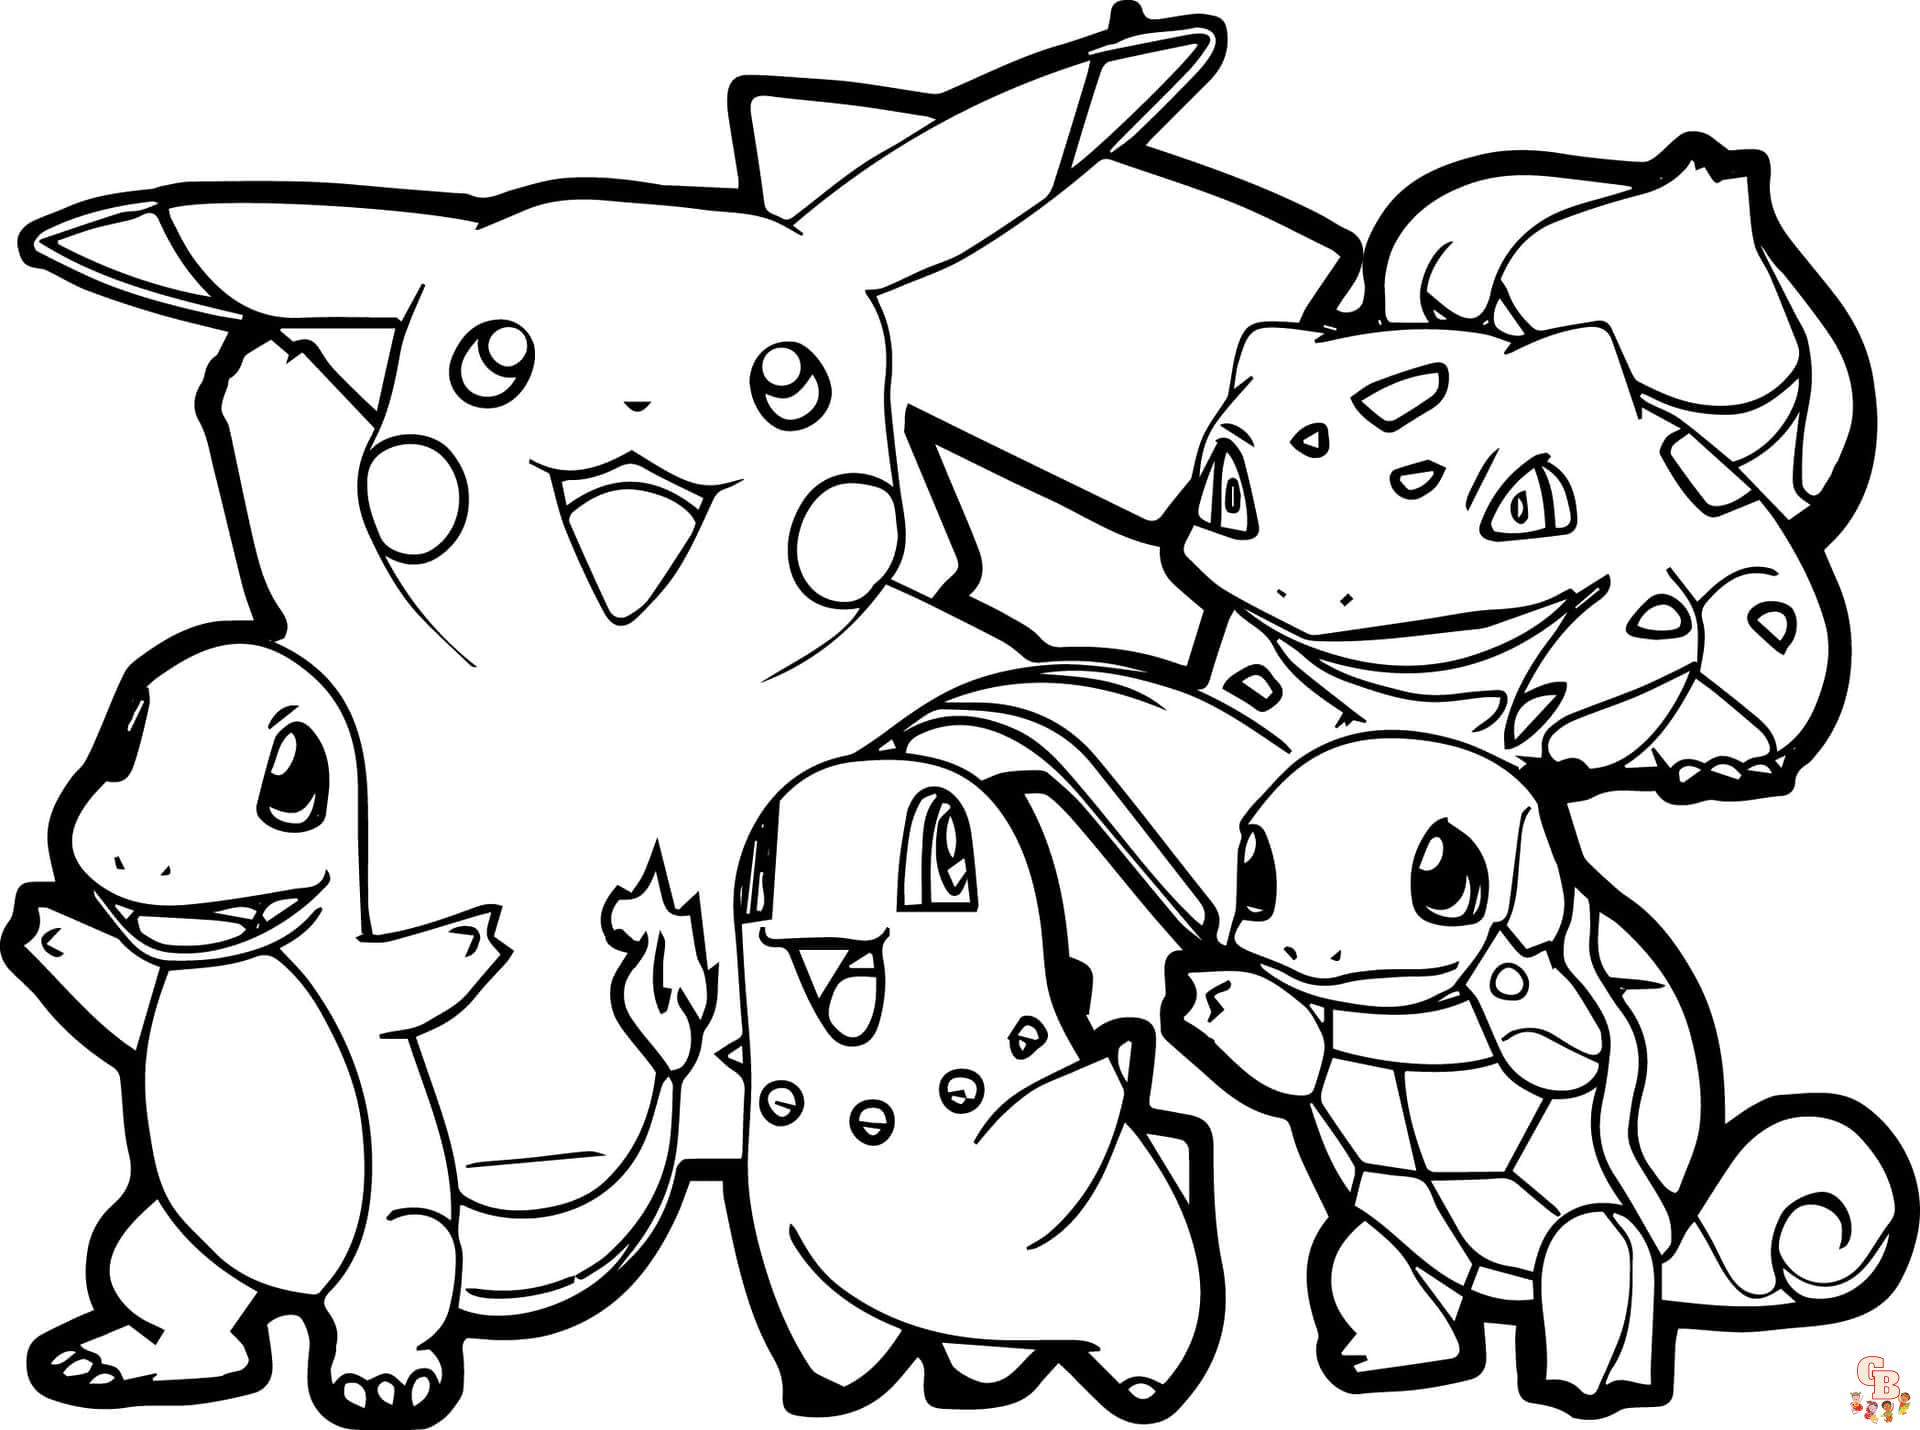 Cute Pokemon coloring pages 15 1